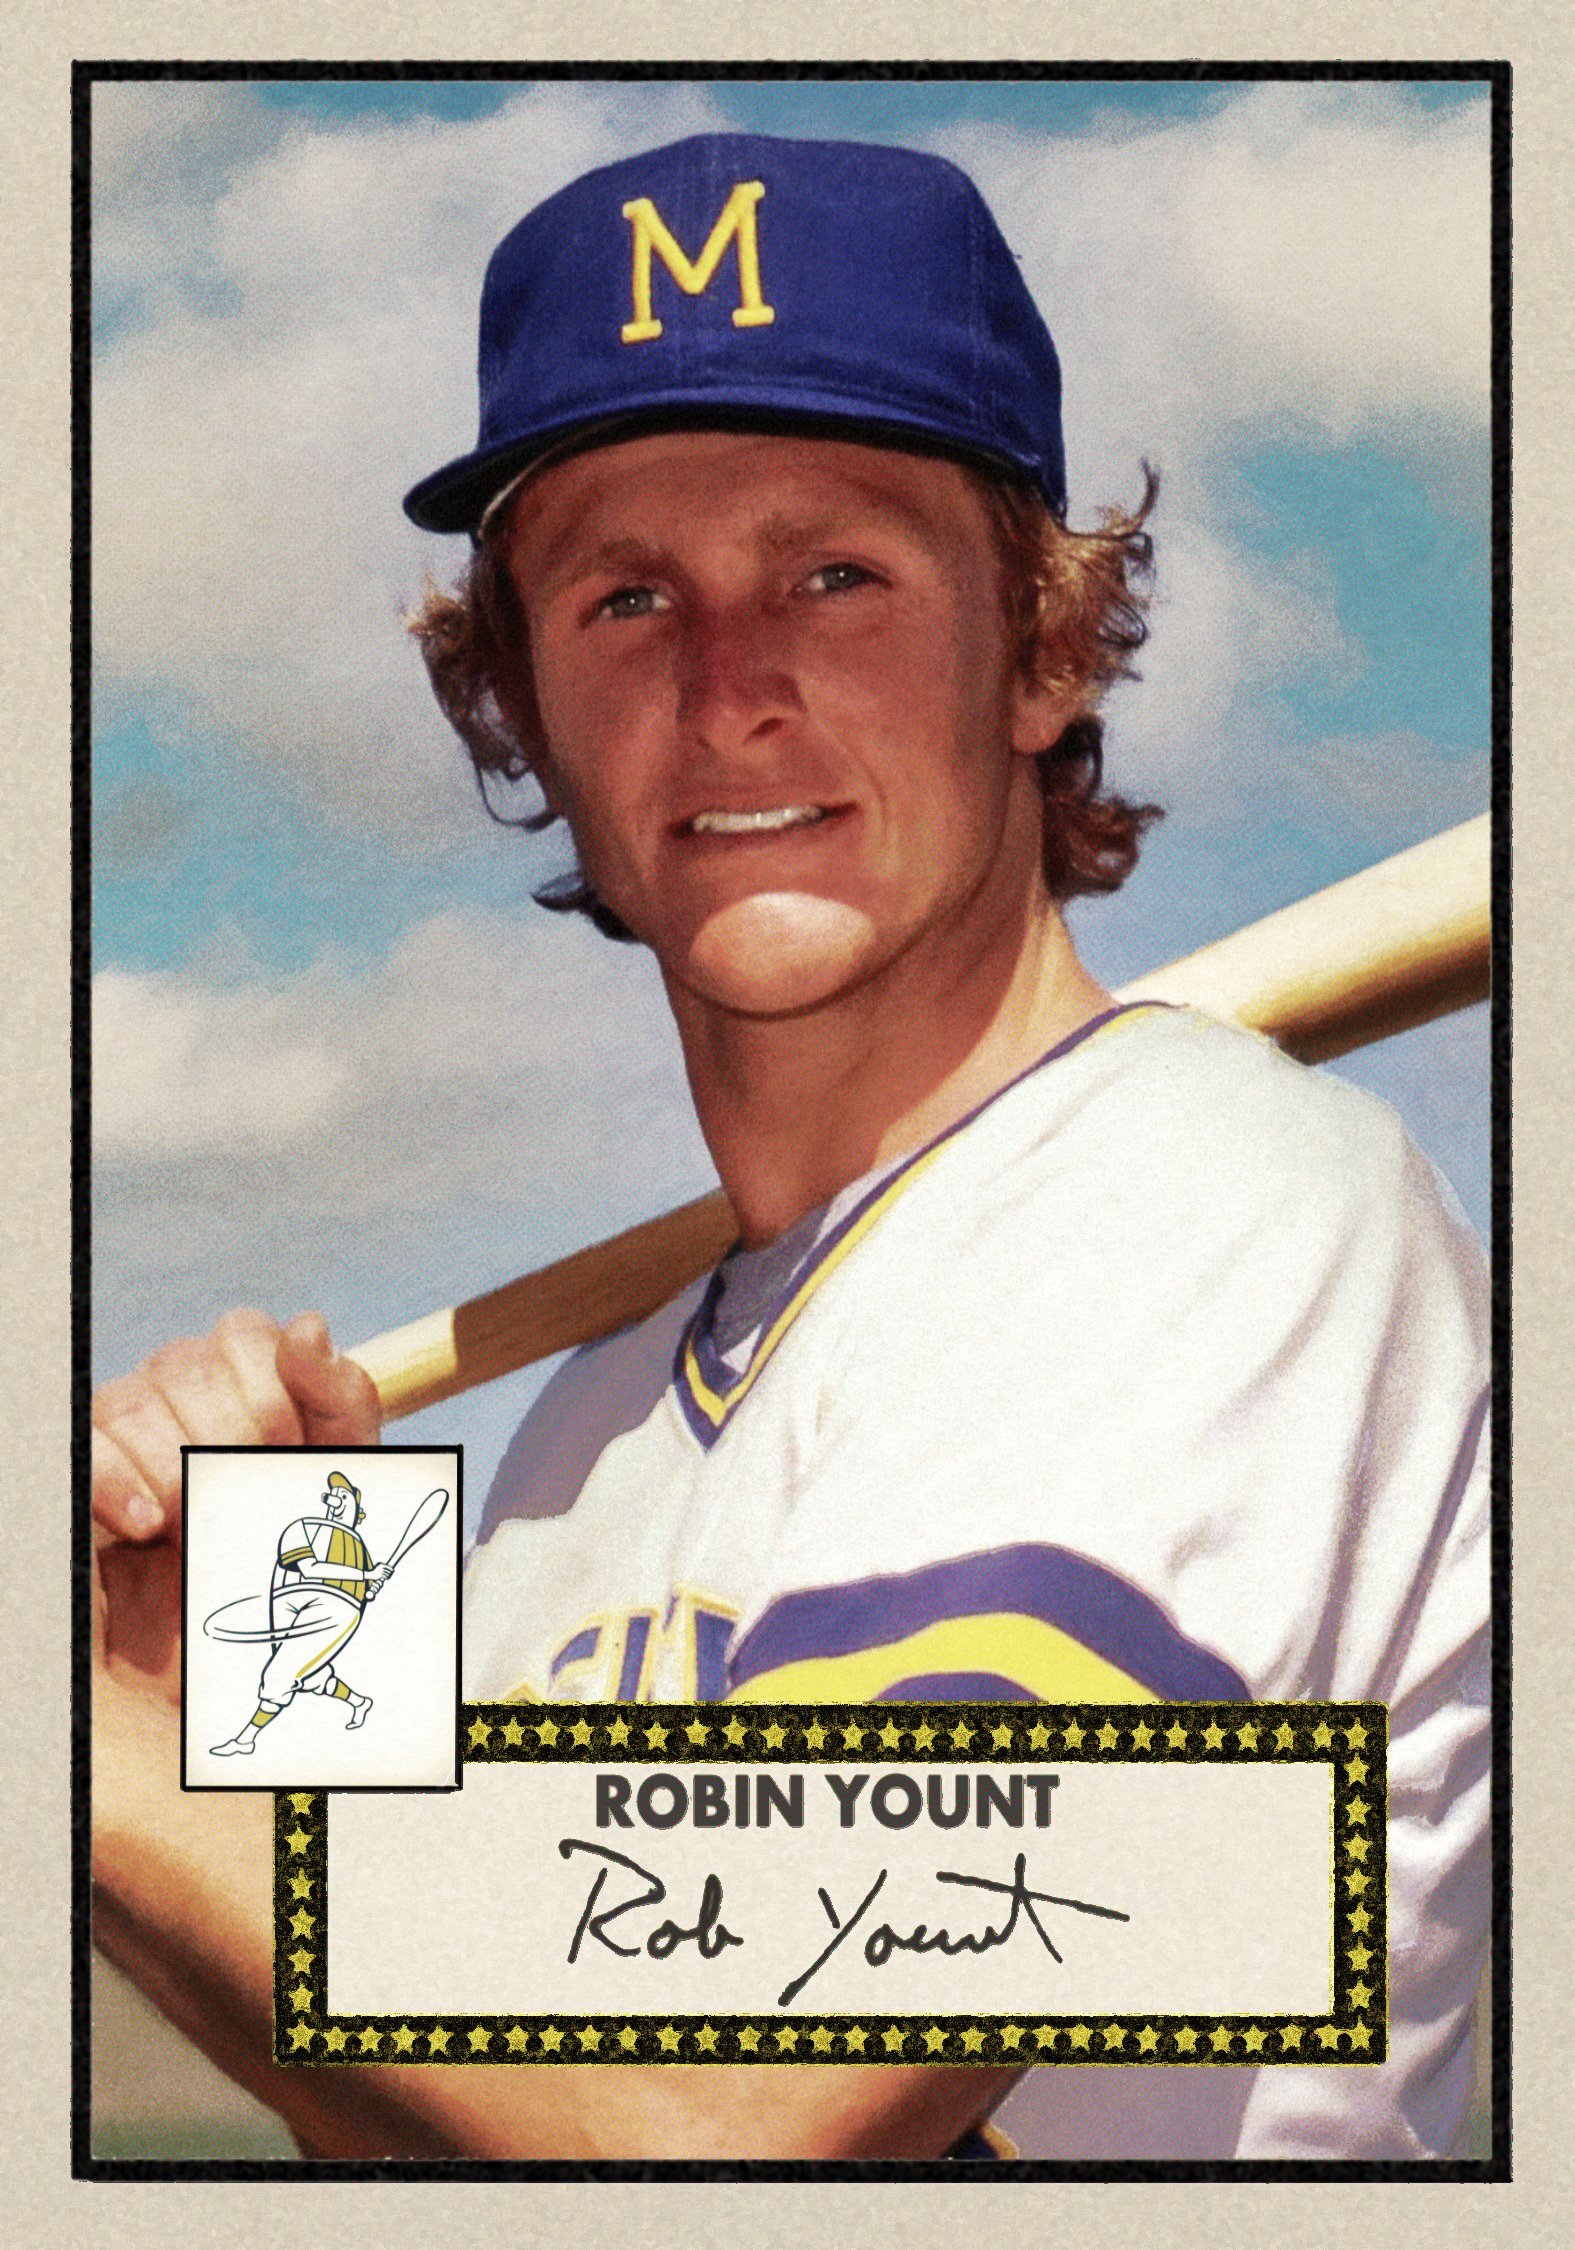 660. Robin Yount less saturated.jpg